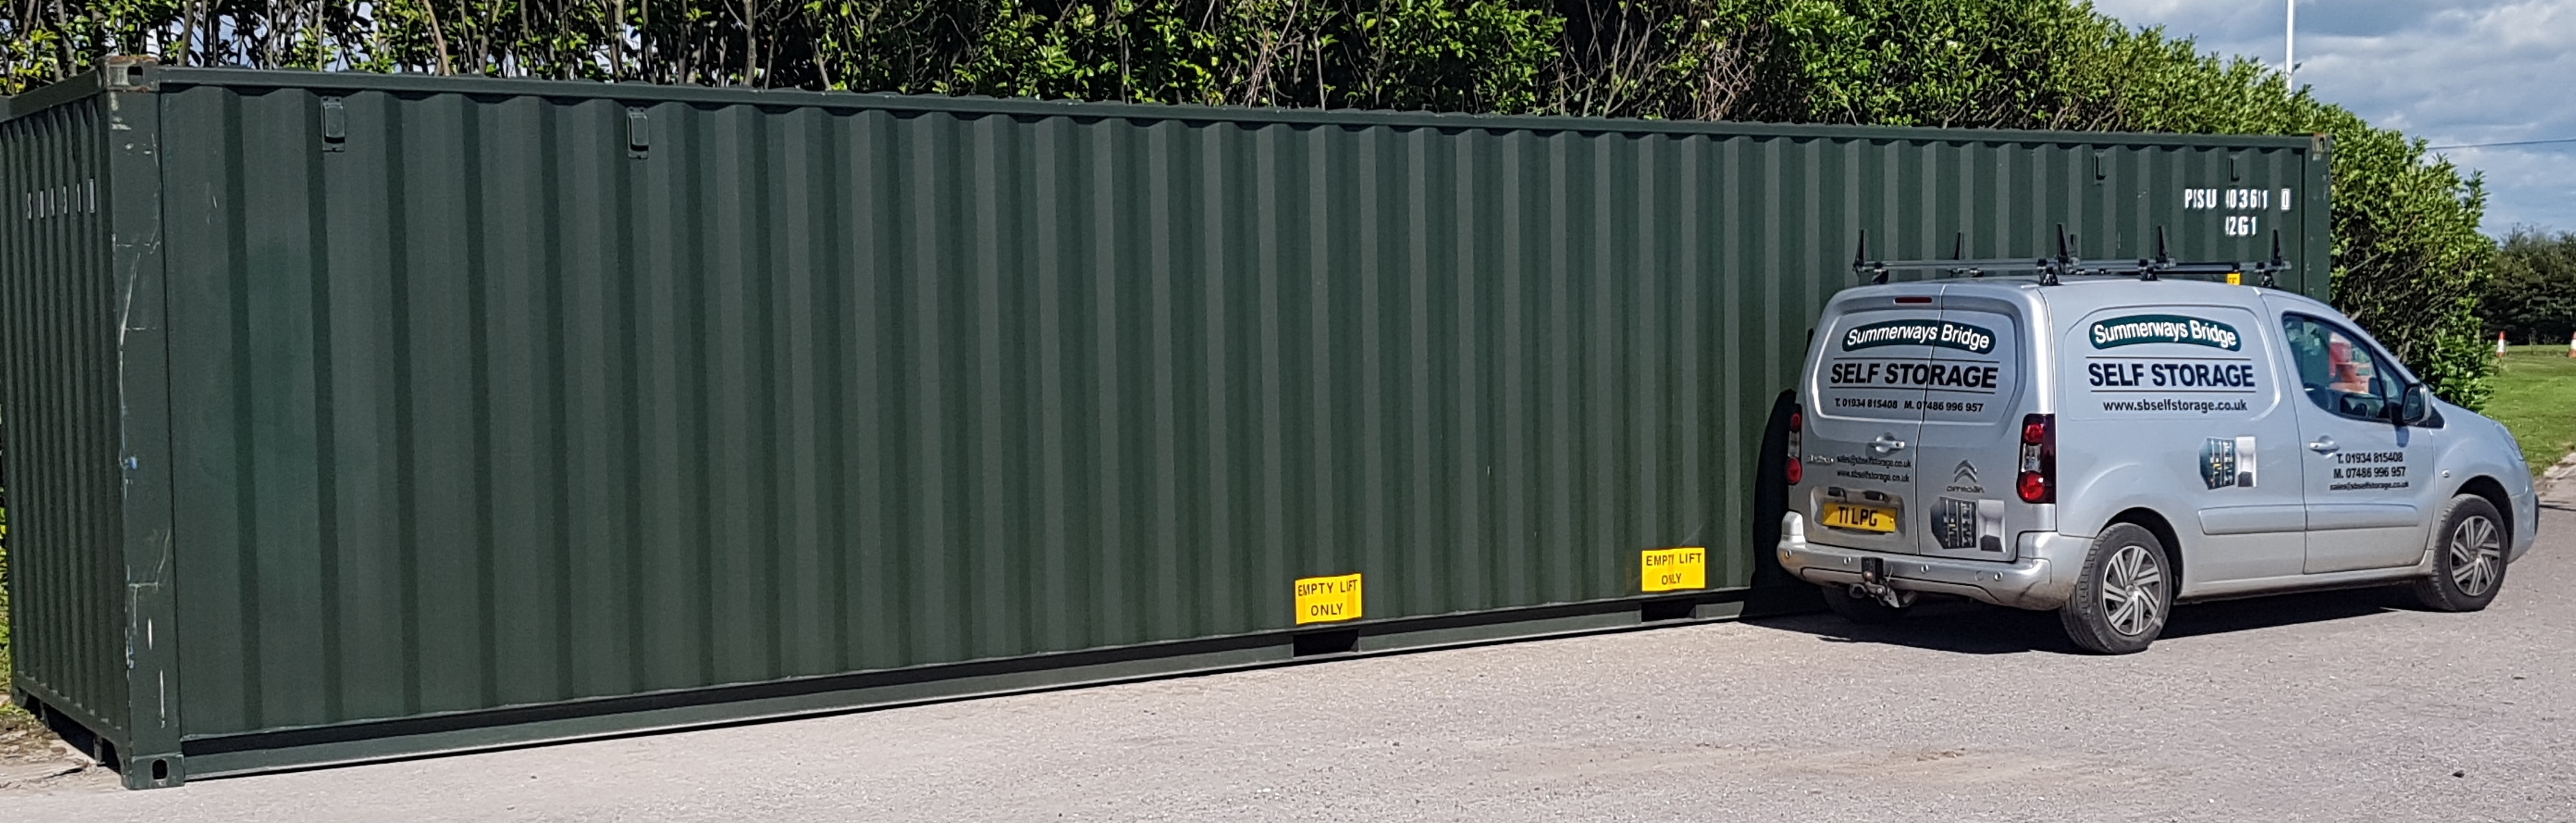 Largest container with company van